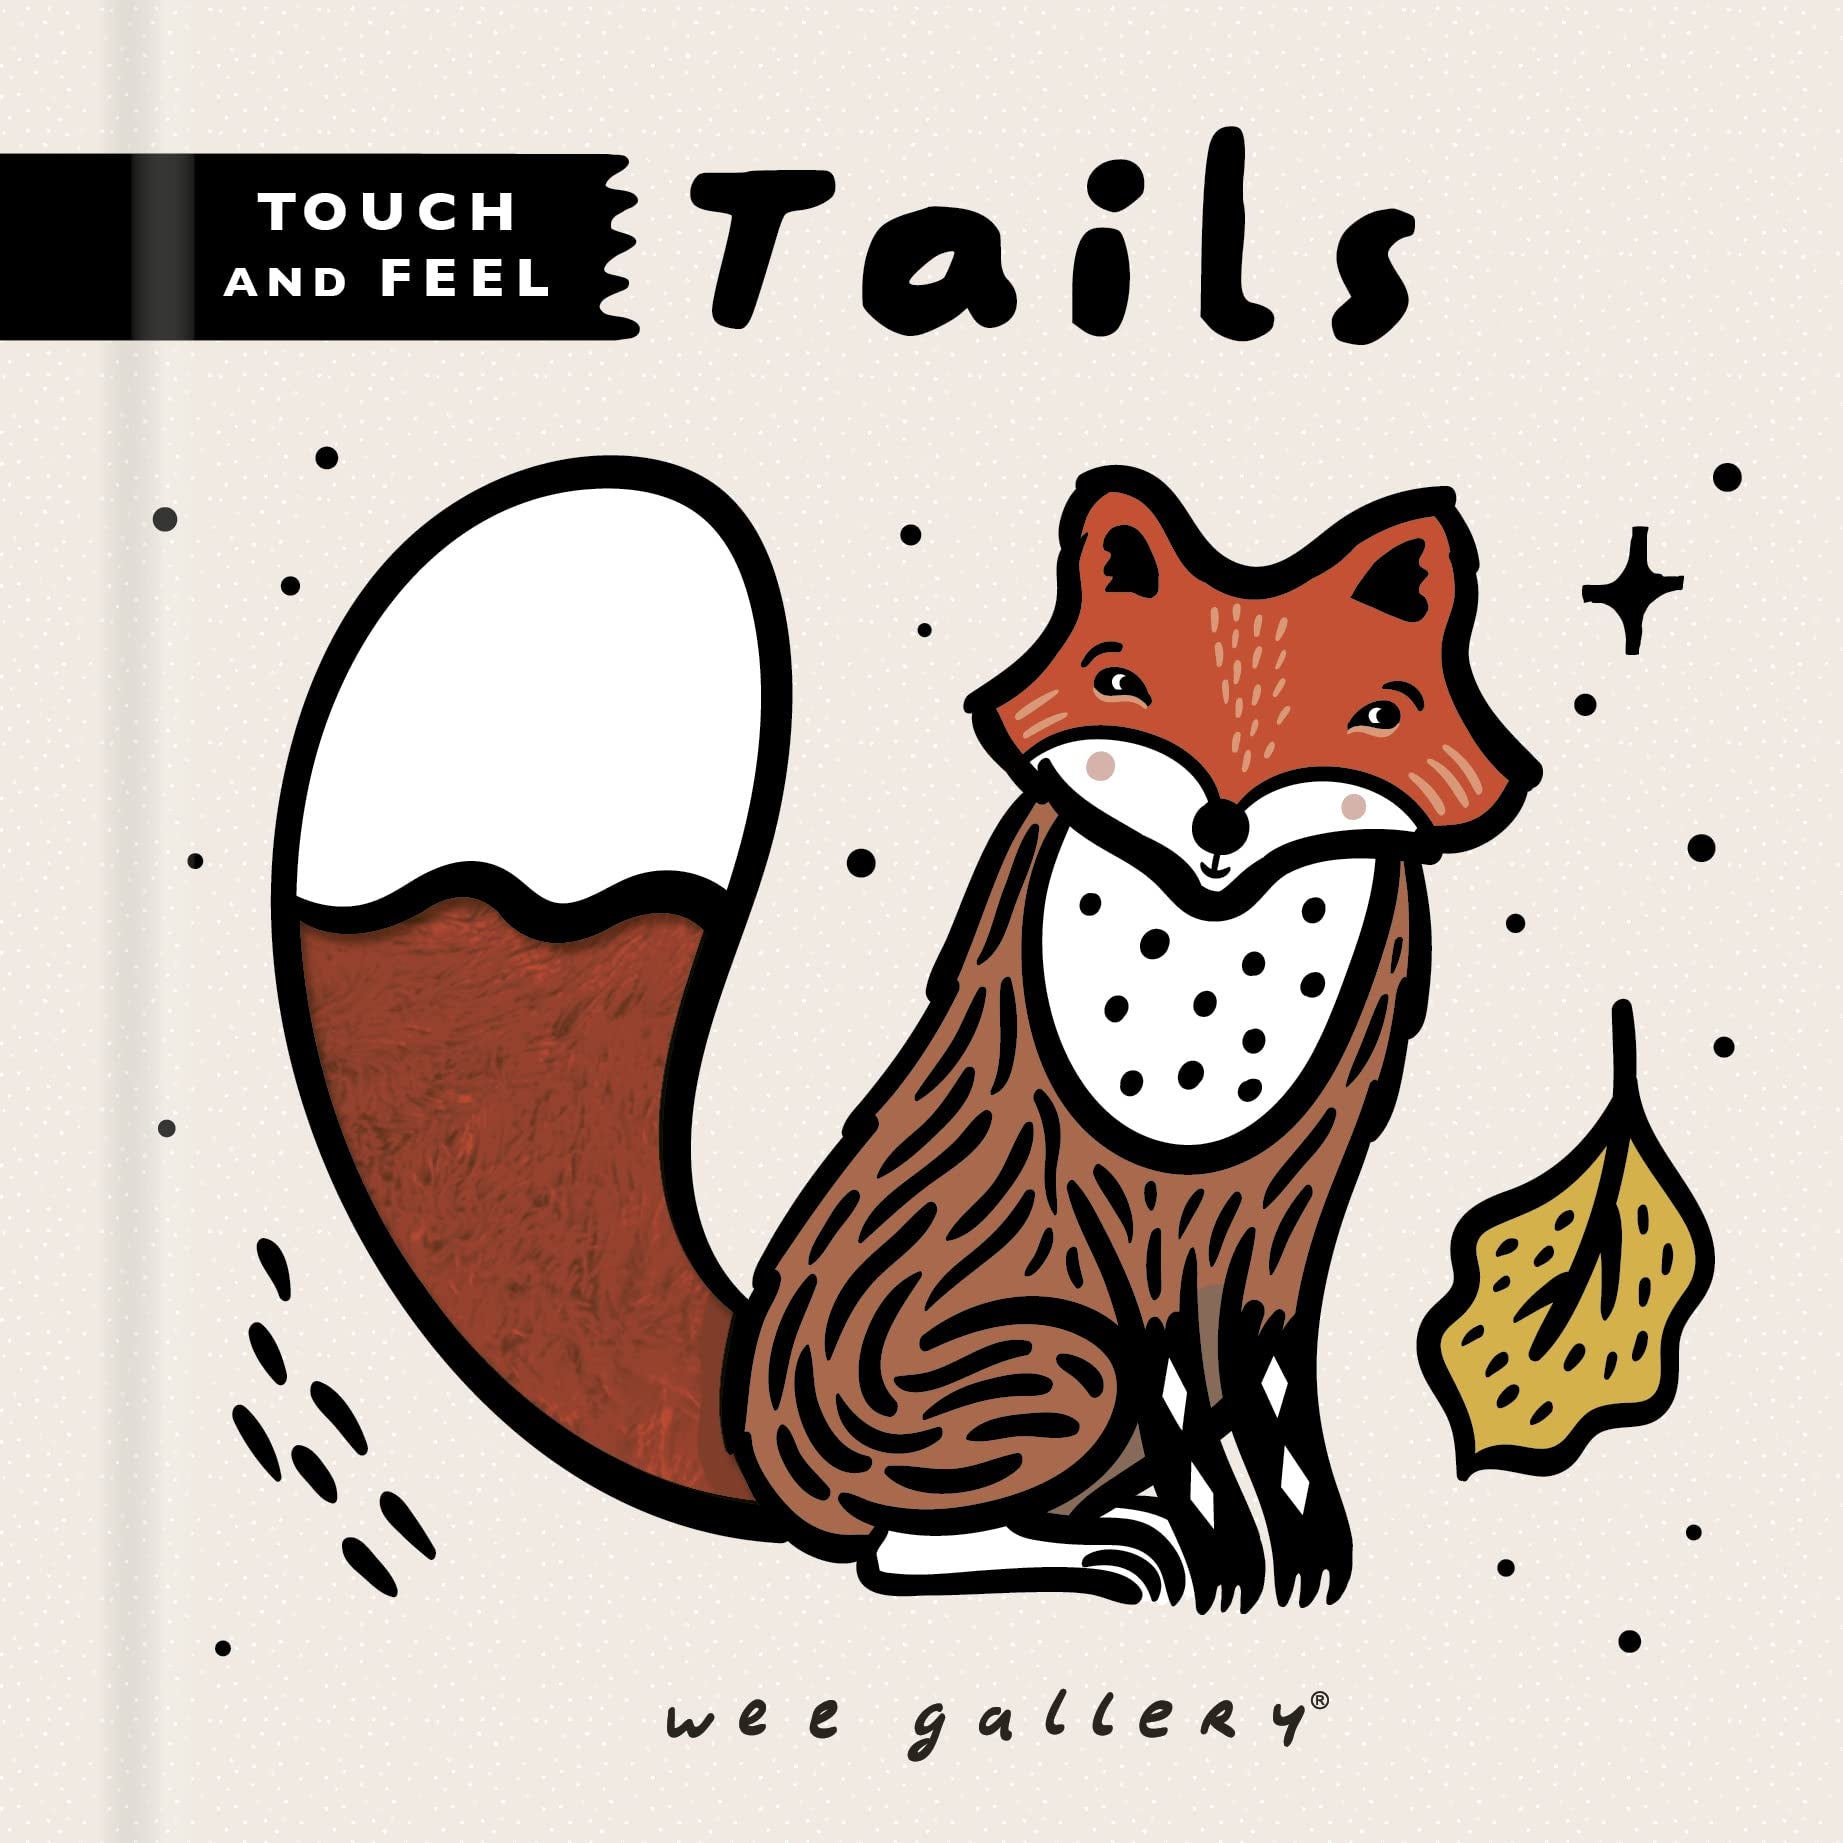 Wee Gallery: Touch and Feel - Tails